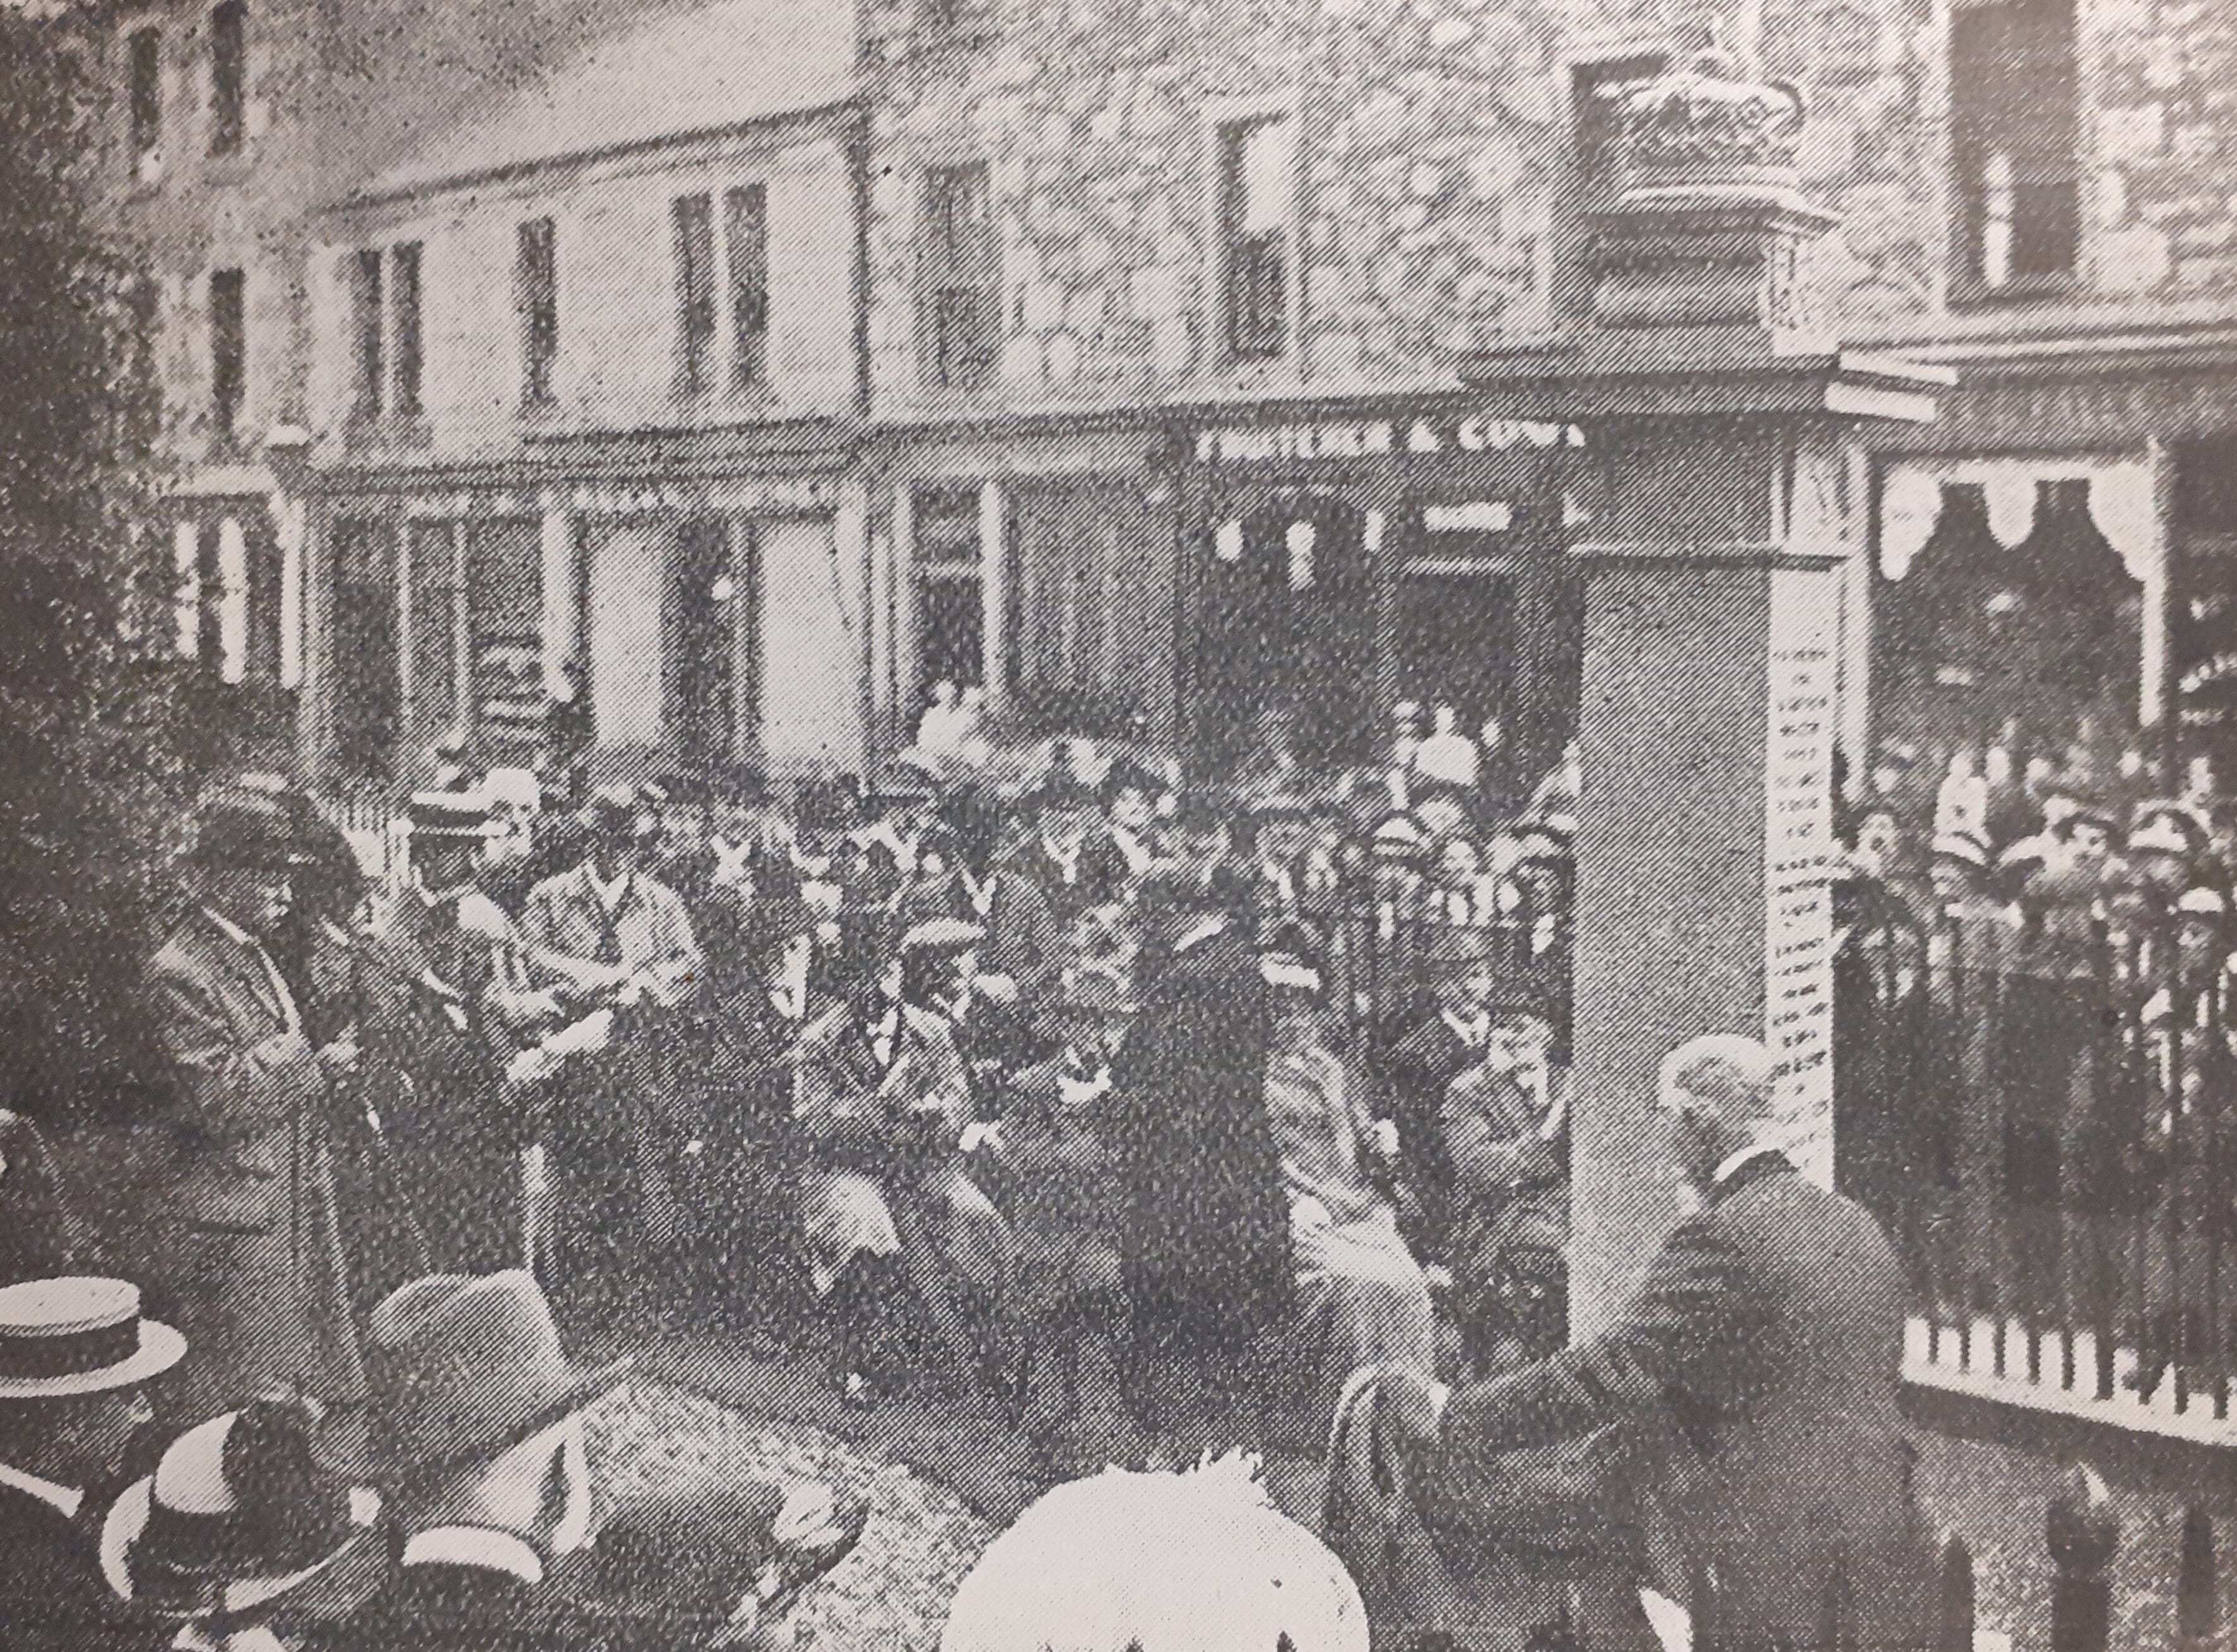 Dr Rait unveiling the commemorative monument raised to the Charterhouse in 1914